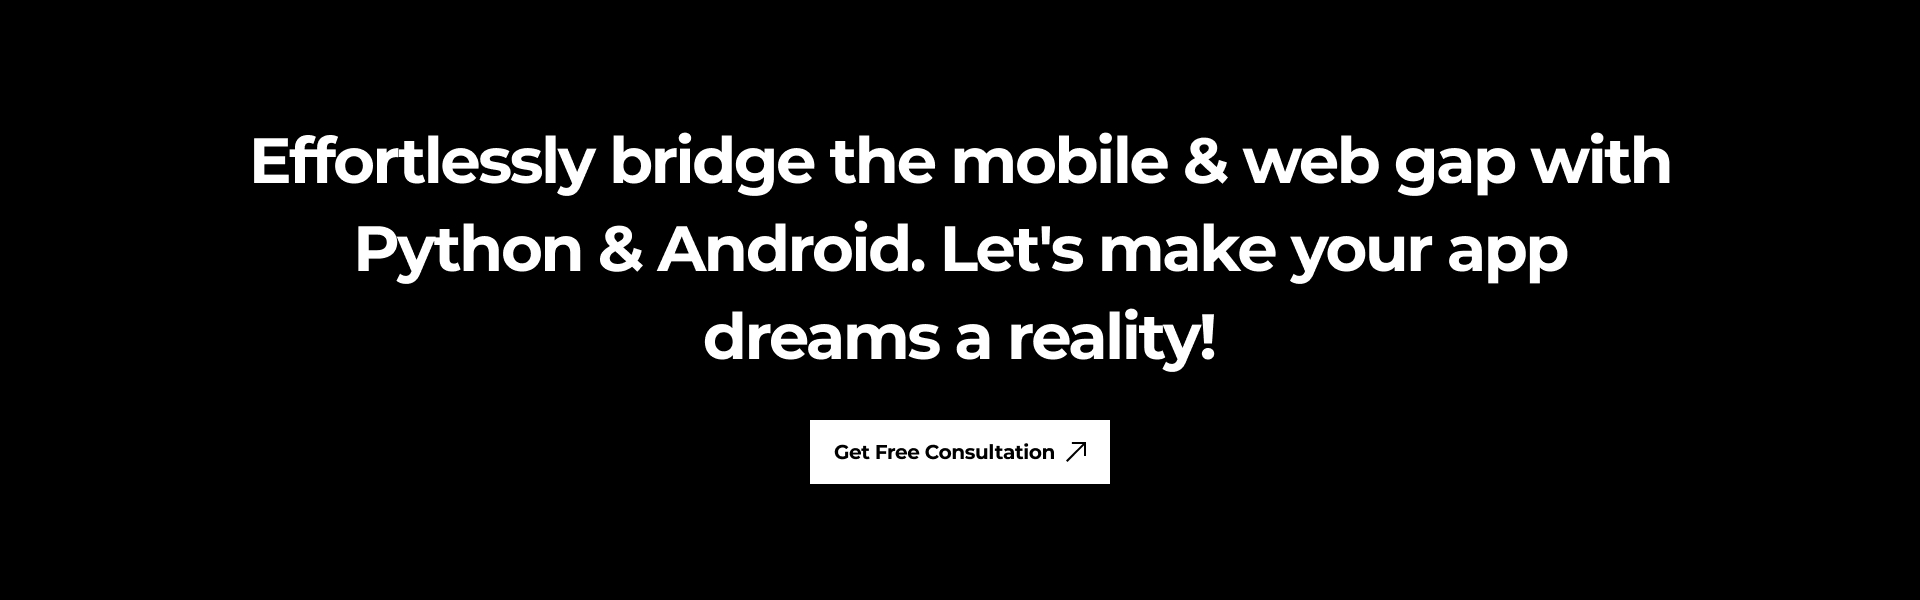 Effortlessly bridge the mobile & web gap with Python & Android. Let's make your app dreams a reality!